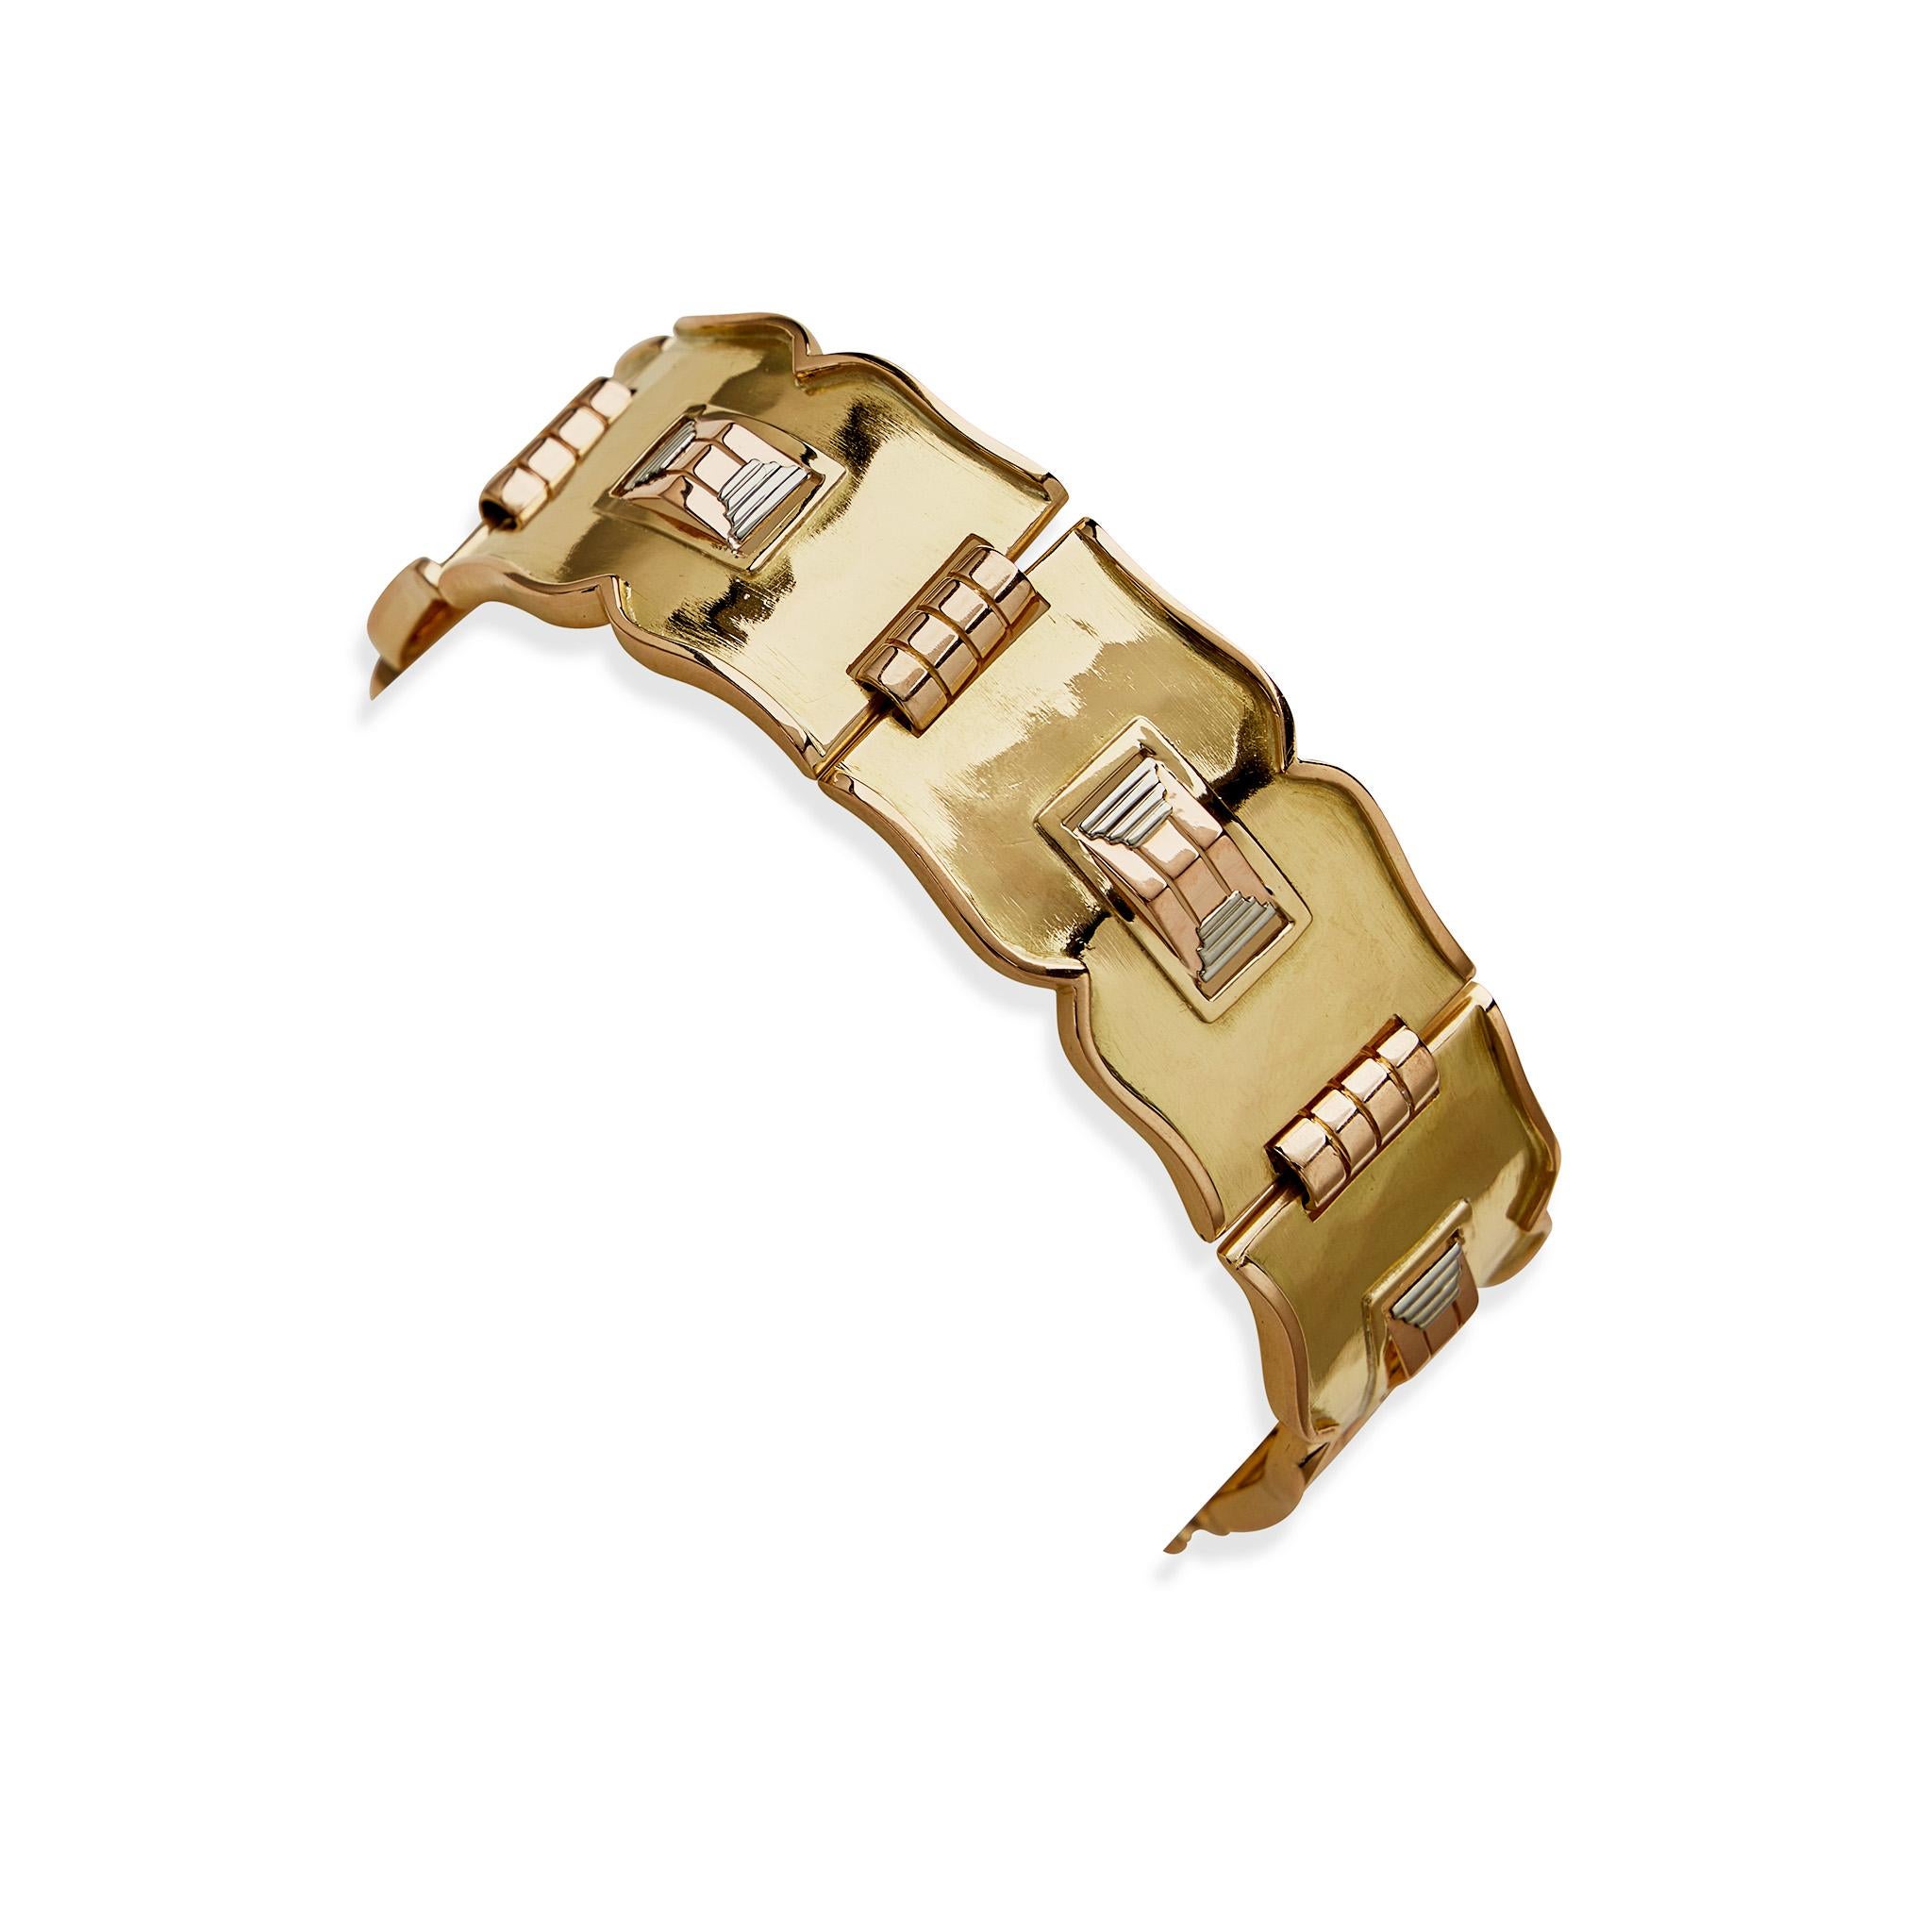 Composed of tri-color 18K gold, this modernist bracelet by French jewelry artist Després dates from 1935-1940. It is designed as a series of yellow gold arched, waisted plaques with subtle hammered texturing, centering ridged prism and graduating